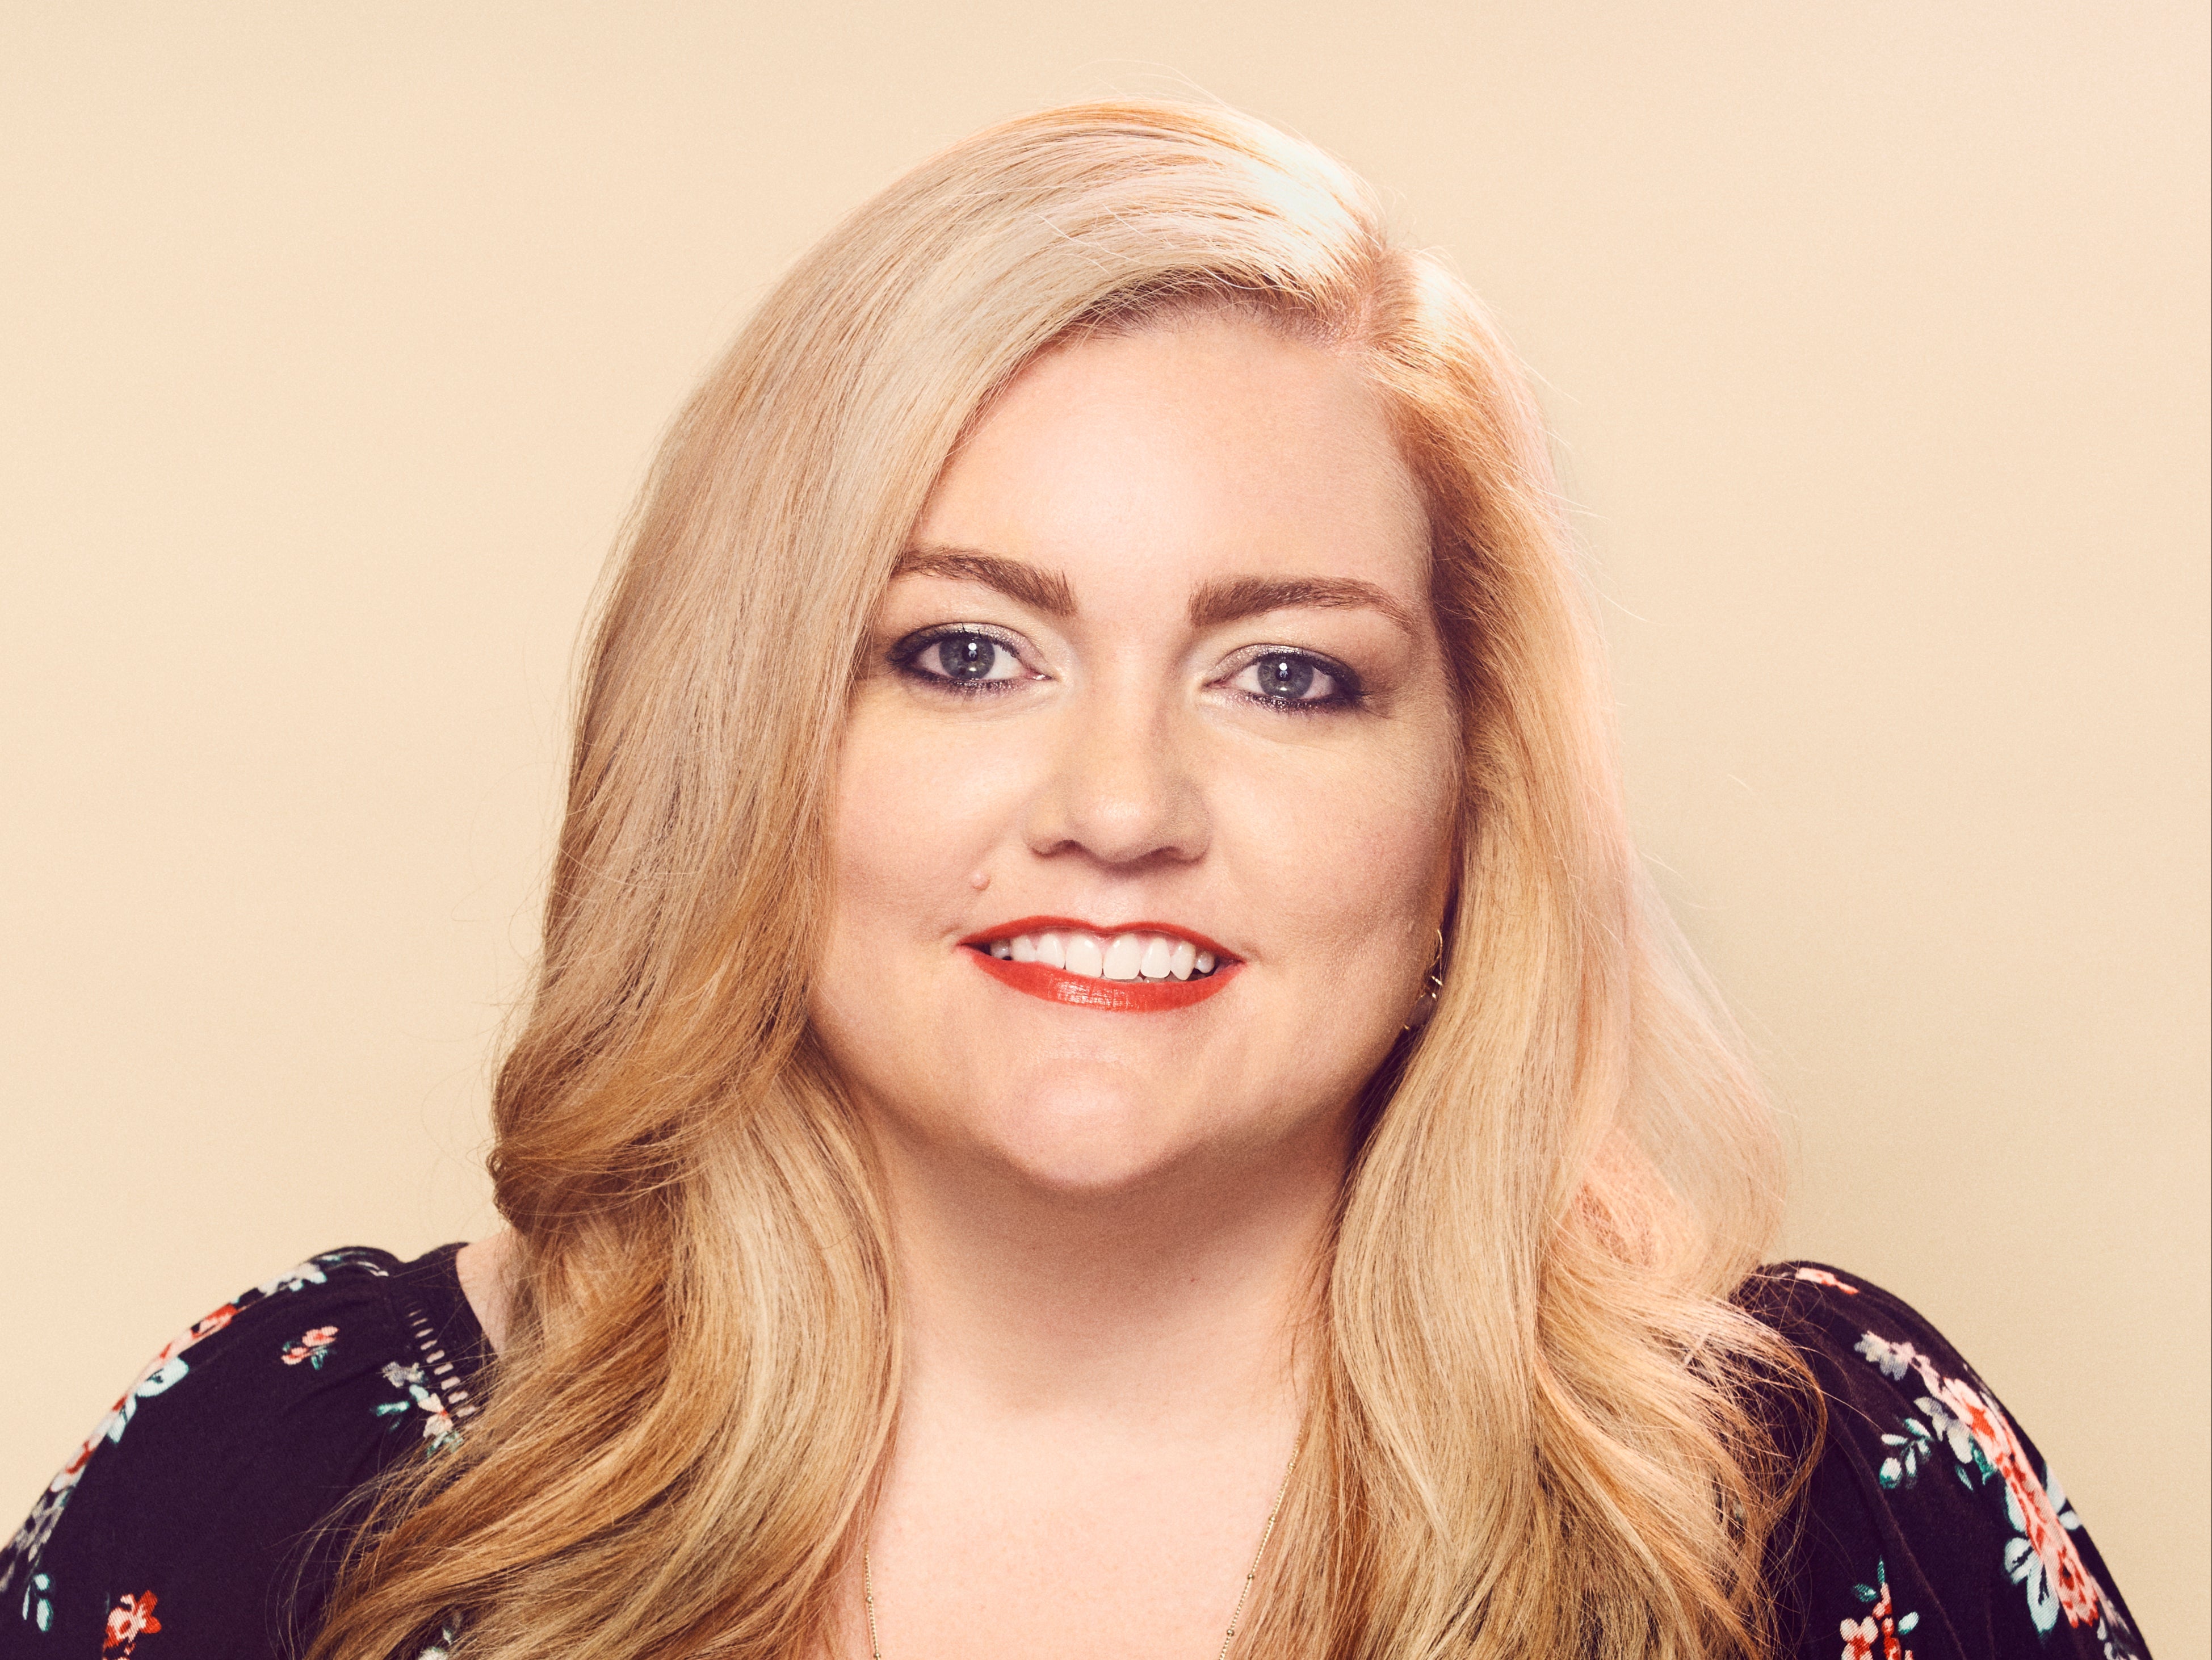 Colleen Hoover, 43, grew up in rural East Texas and still lives in the same rural region with her family